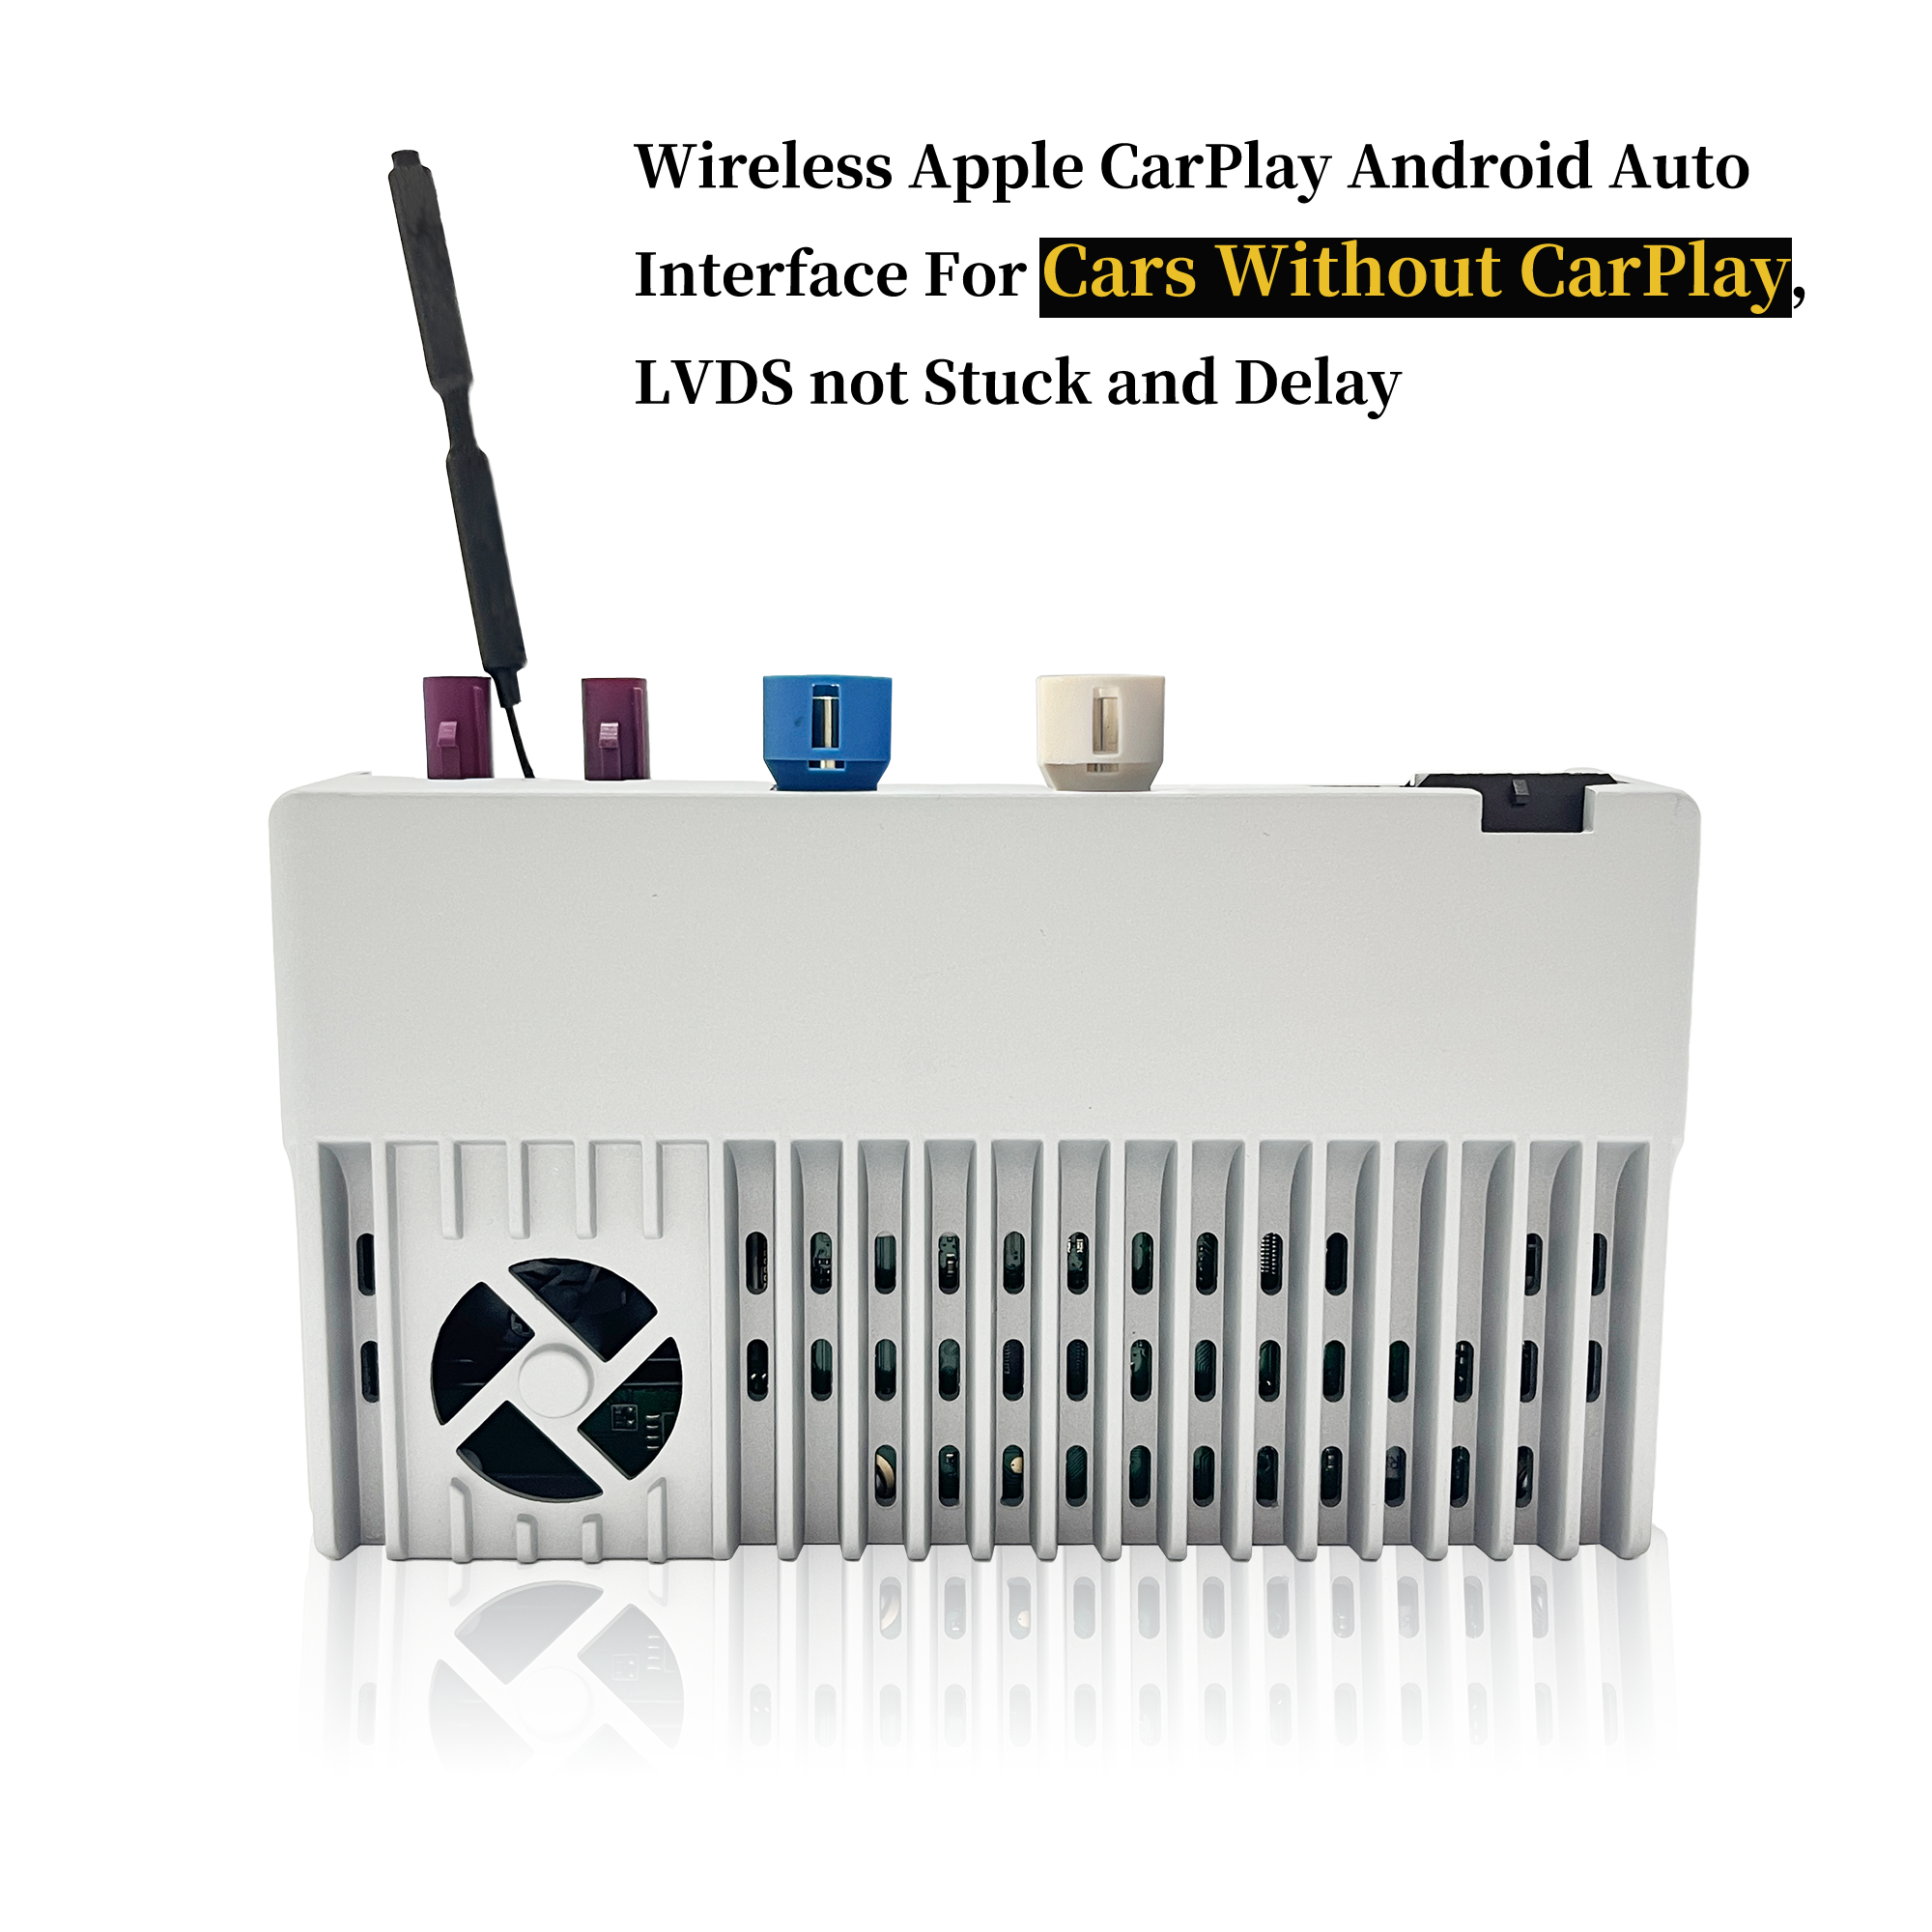 Android Auto Adapter For Volvo V90 Apple CarPlay Wireless ZLINK App for Screen Mirroring Wi-Fi LVDS Interface Is for Special Car, Compatible Car With Or Without OEM Wired CarPlay